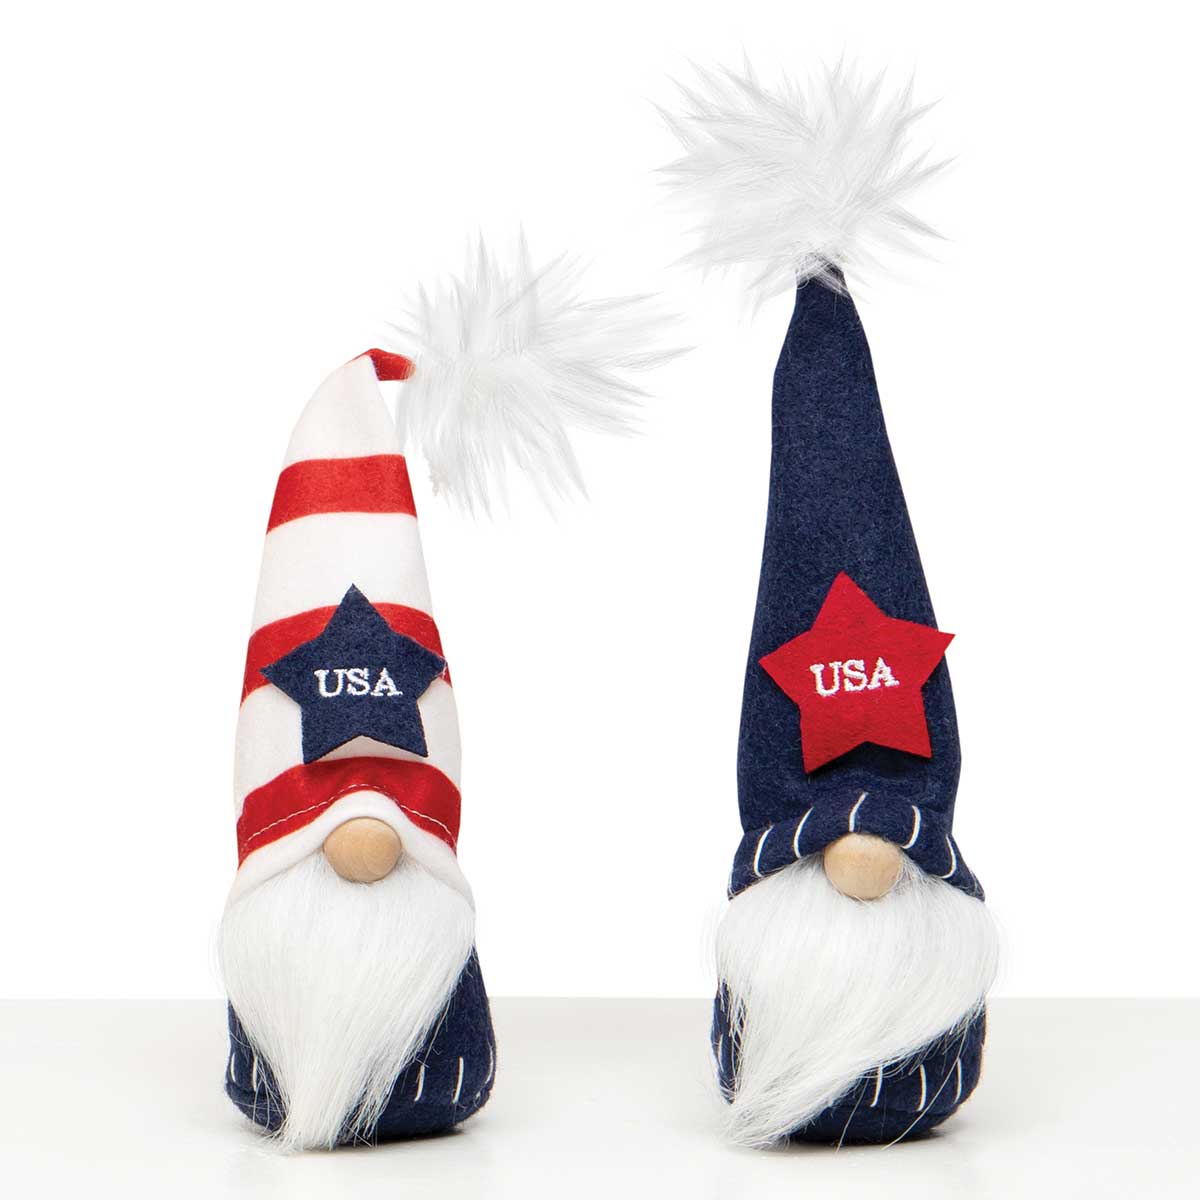 USA Pride Gnome with Wood Nose 9" White Beard